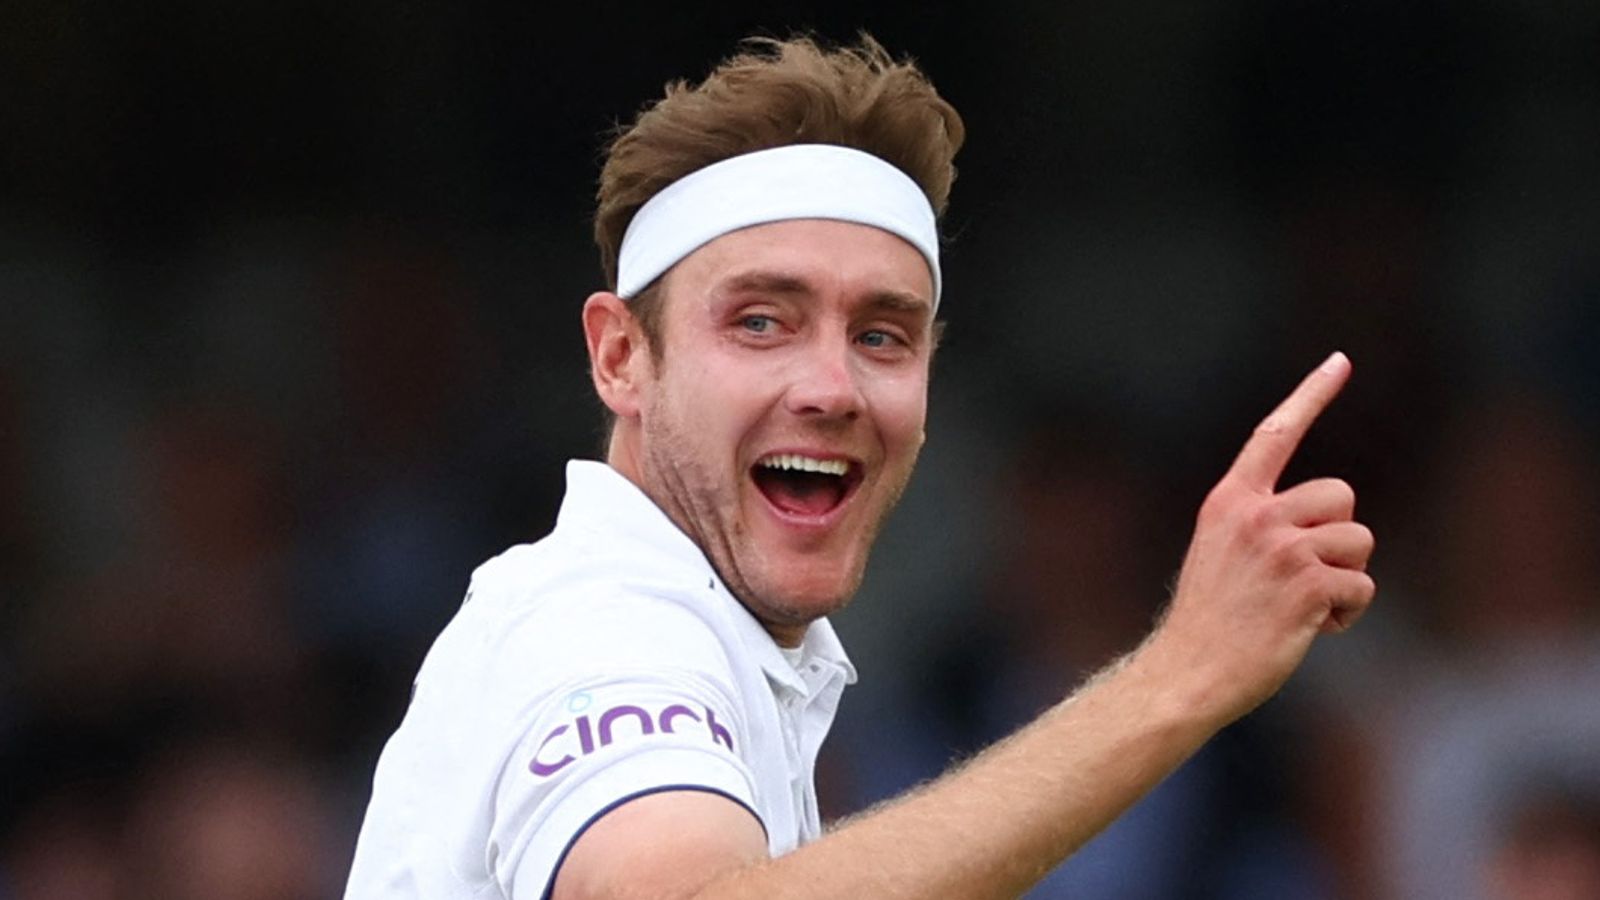 Englands Stuart Broad To Retire From Cricket After Ashes Series